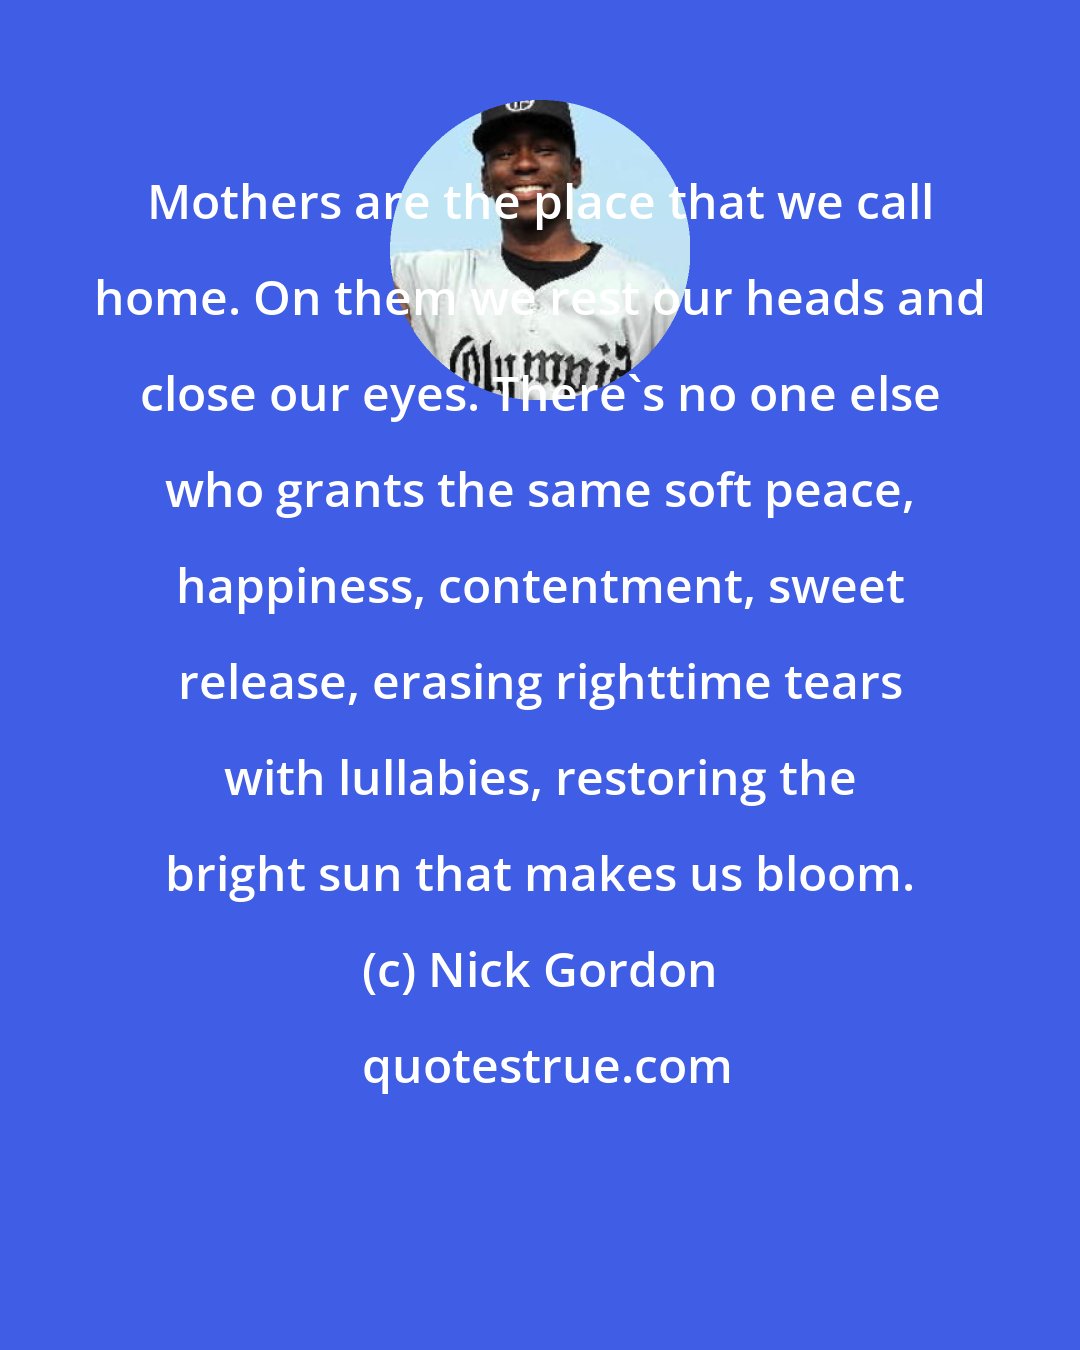 Nick Gordon: Mothers are the place that we call home. On them we rest our heads and close our eyes. There's no one else who grants the same soft peace, happiness, contentment, sweet release, erasing righttime tears with lullabies, restoring the bright sun that makes us bloom.